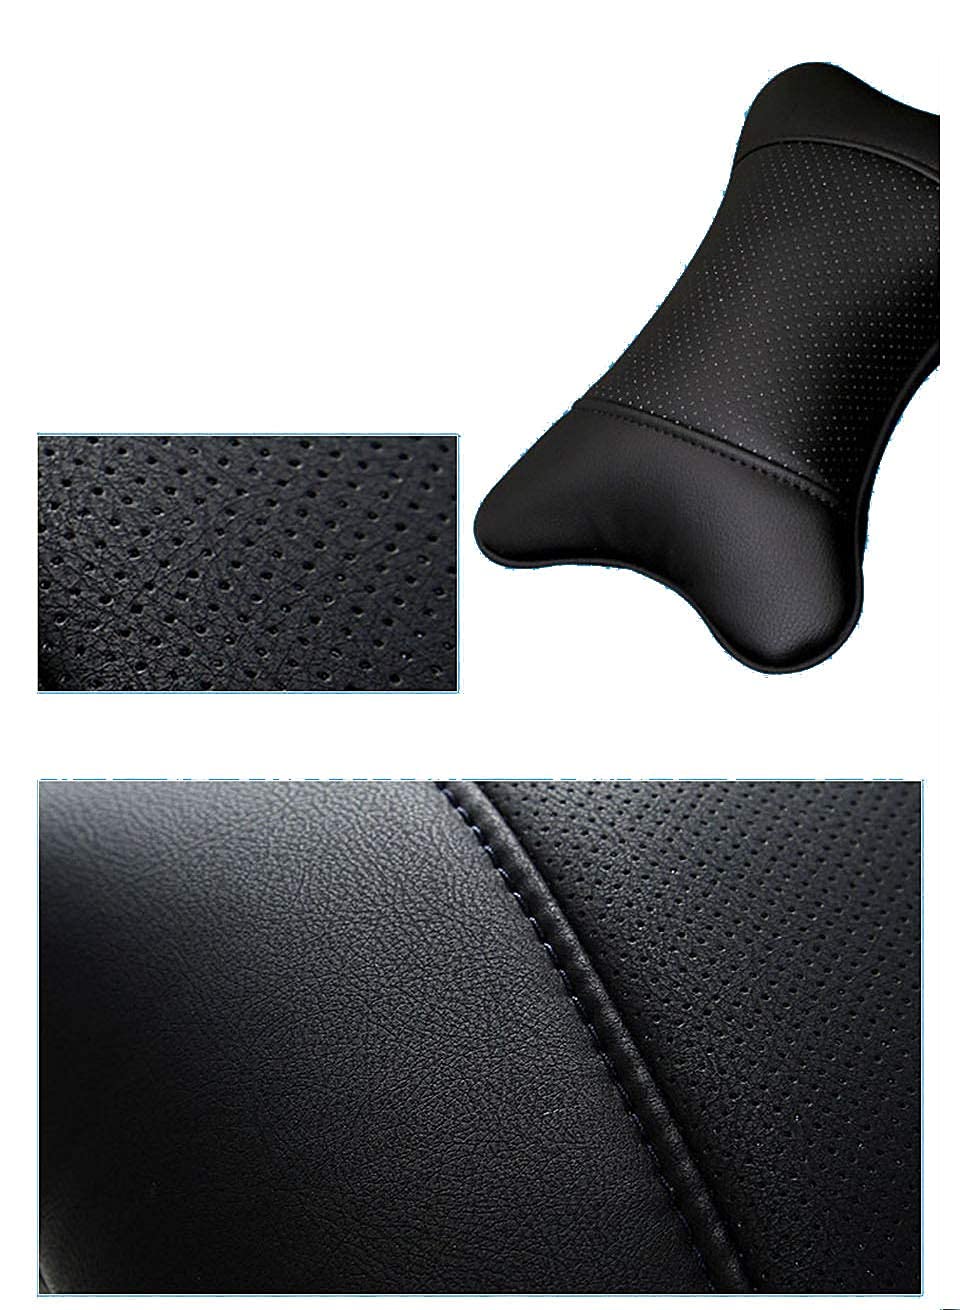 yuhuru Car Neck Pillows Both Side Pu Leather 2pieces Pack Headrest Fit for Most Cars Filled Fiber Universal Car Pillow (Black)